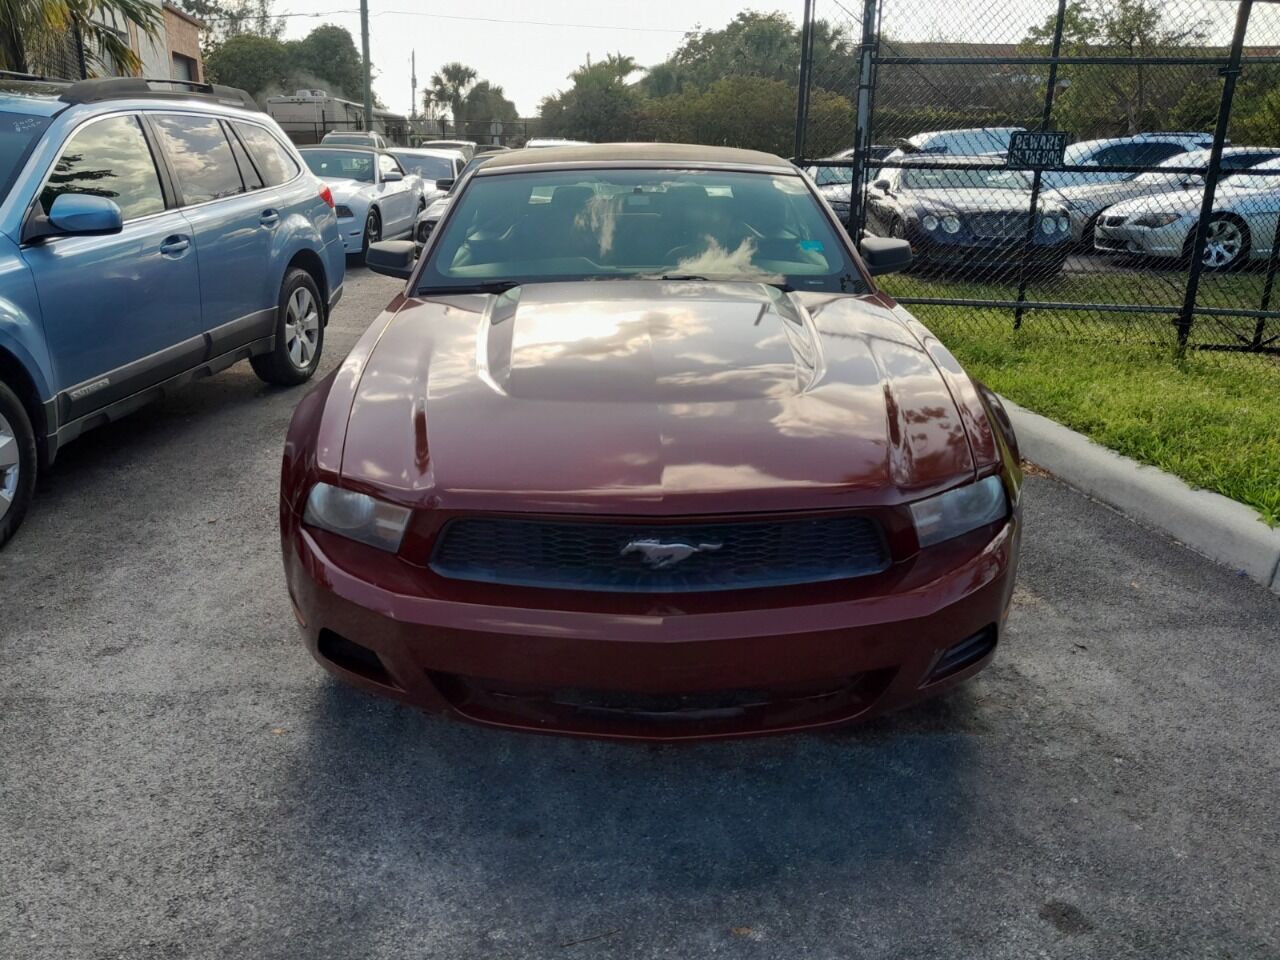 2012 Ford Mustang Convertible - $6,950